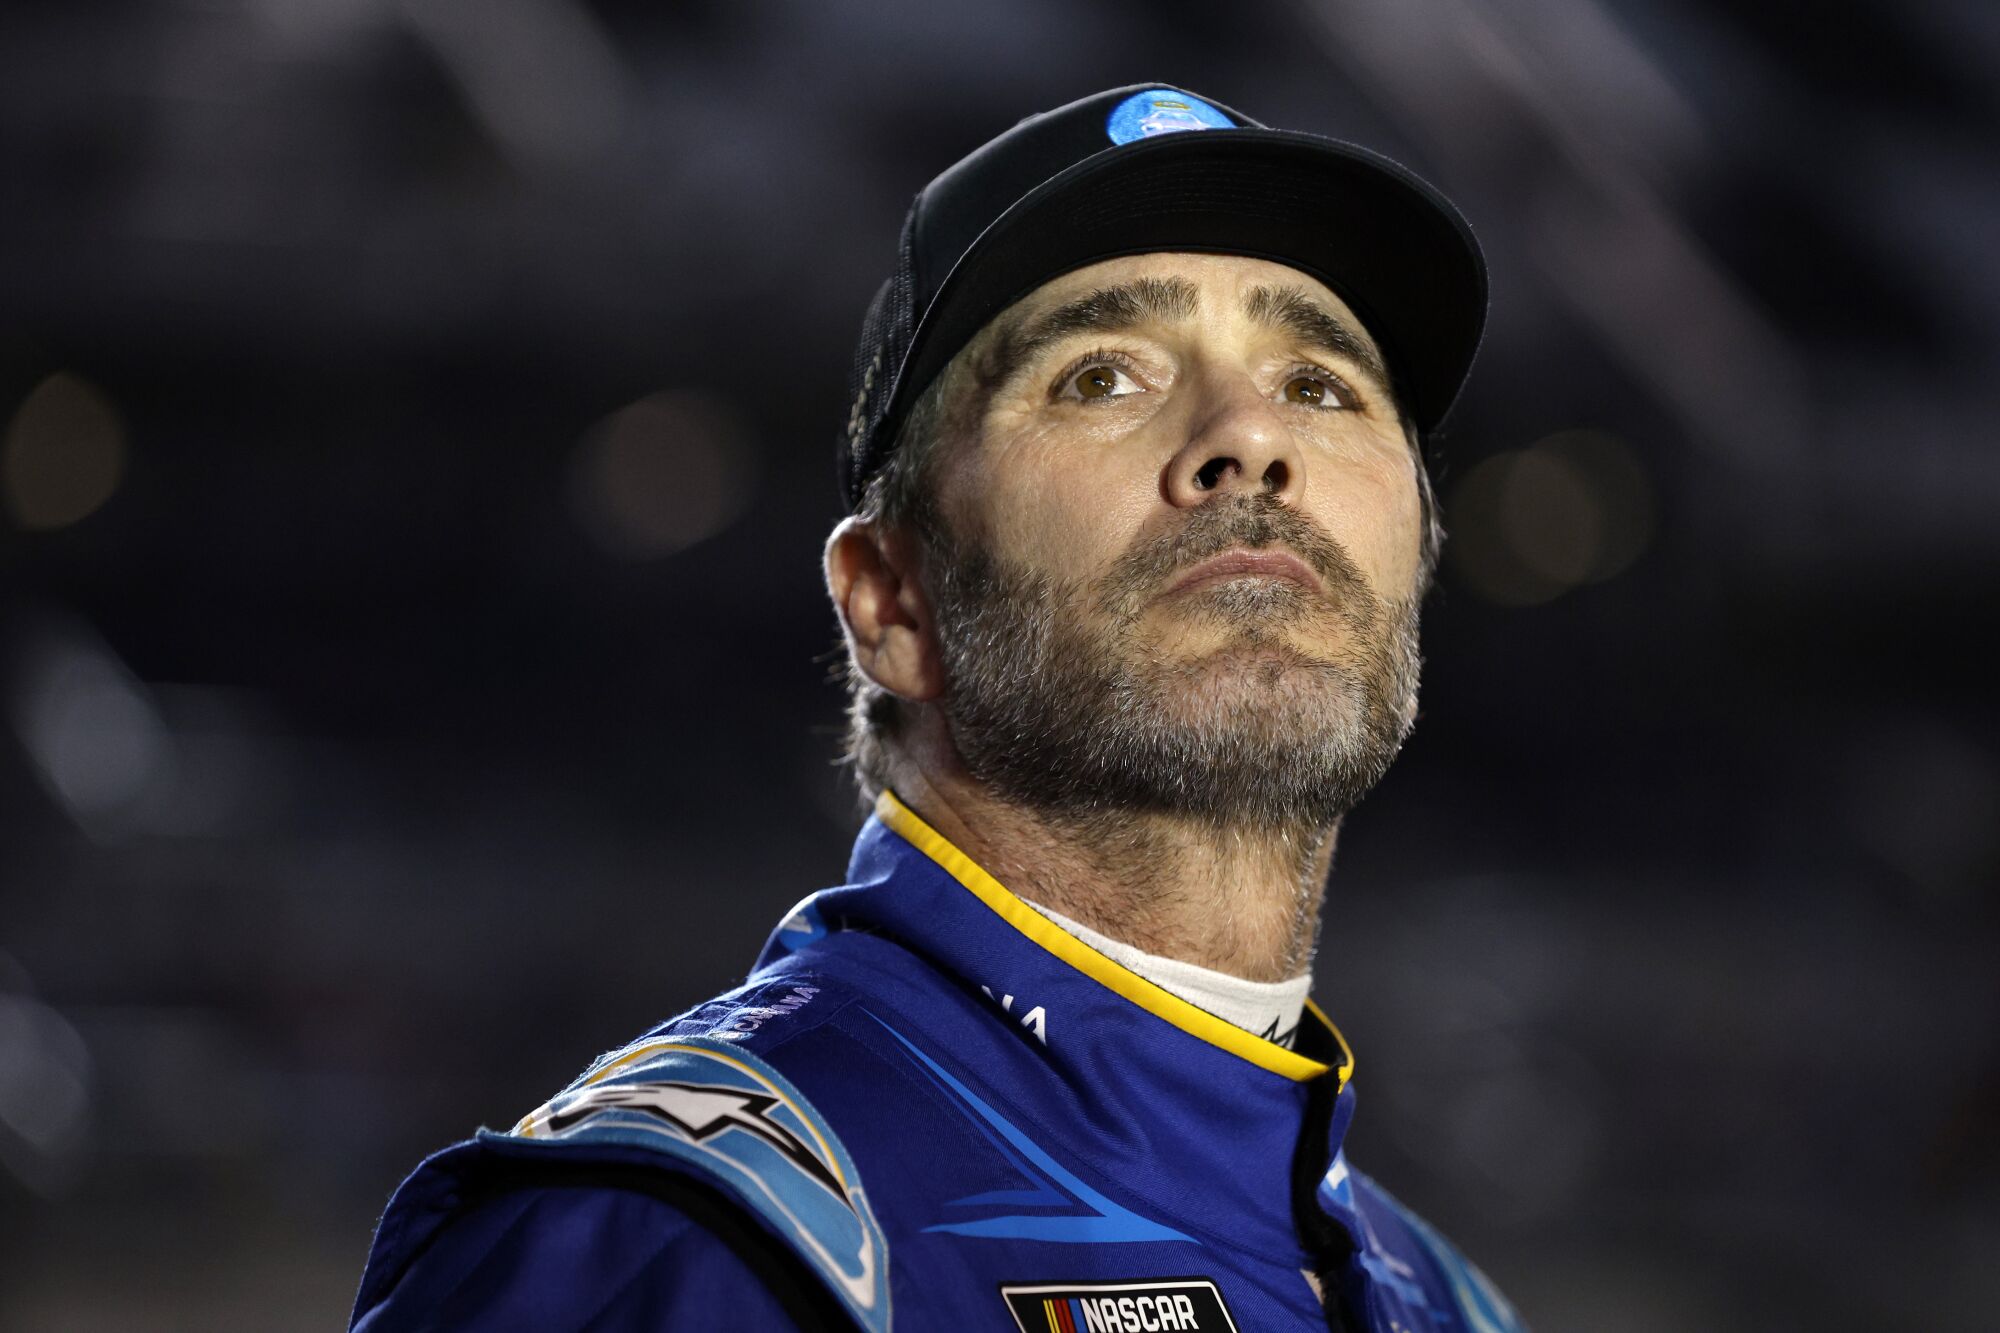 Jimmie Johnson wearing blue racecar outfit and black cap